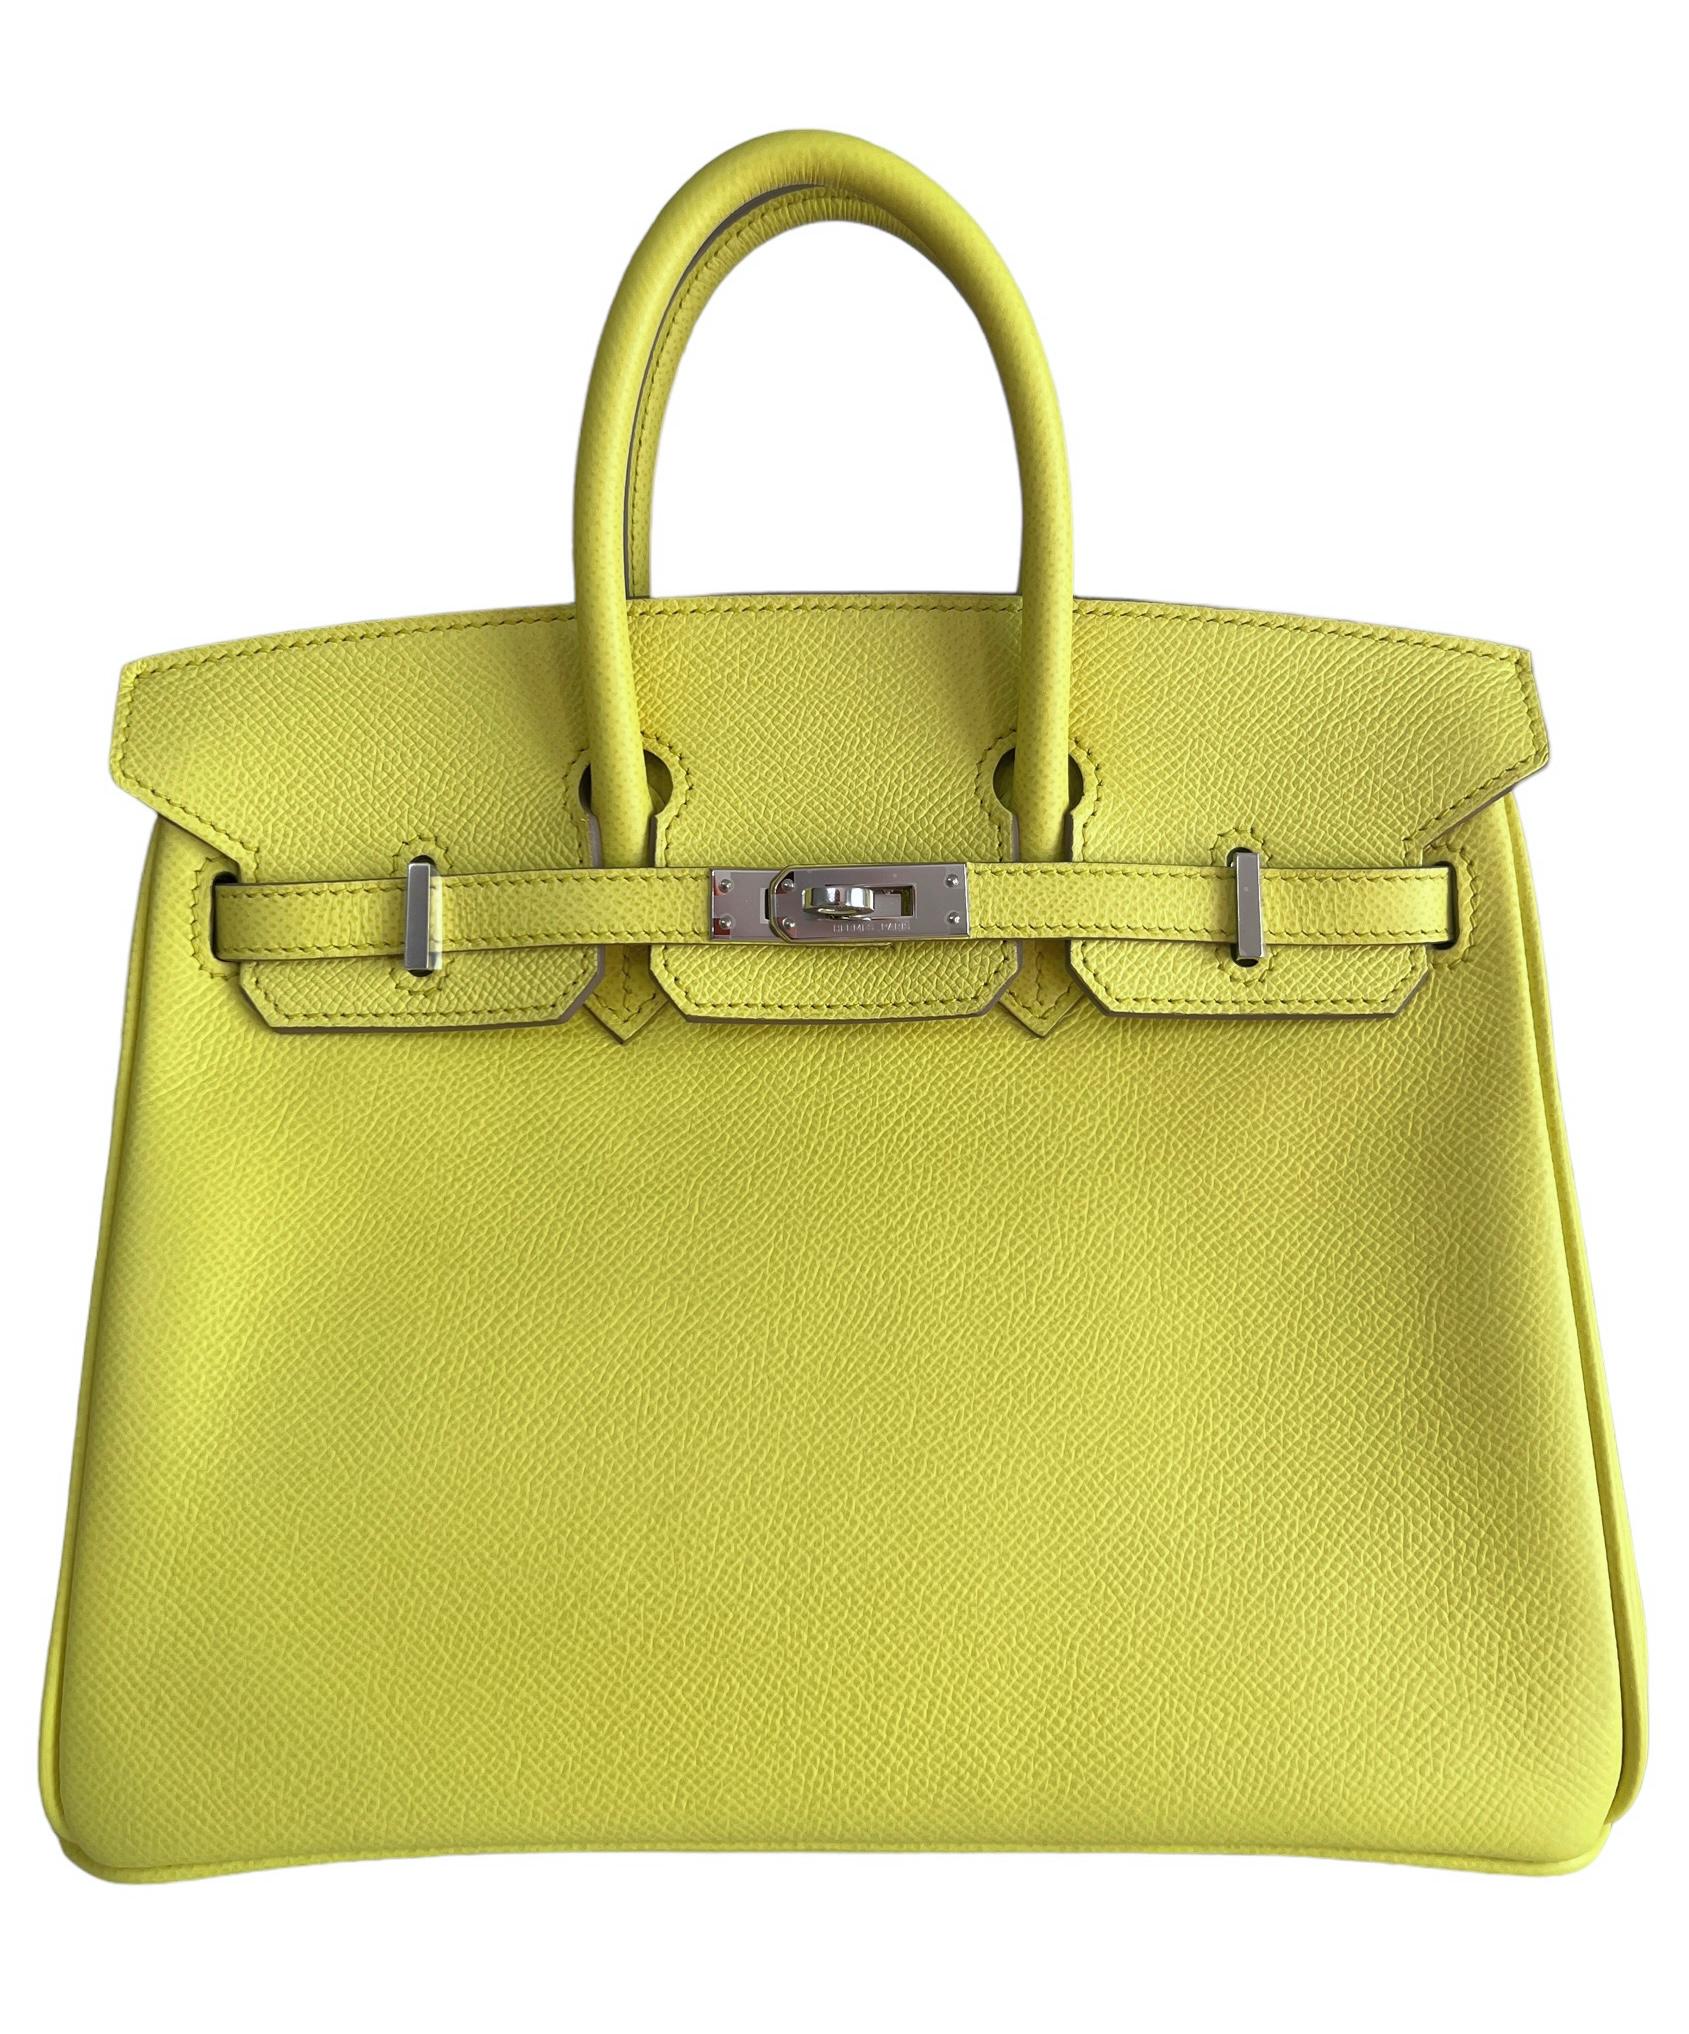 Stunning Rare Hermes Birkin 25 Lime Yellow Epsom Leather Complimented by Palladium Hardware. Excellent Condition with Plastic on Hardware. Excellent corners, structure and interior. 

Shop with Confidence from Lux Addicts. We are a very well known